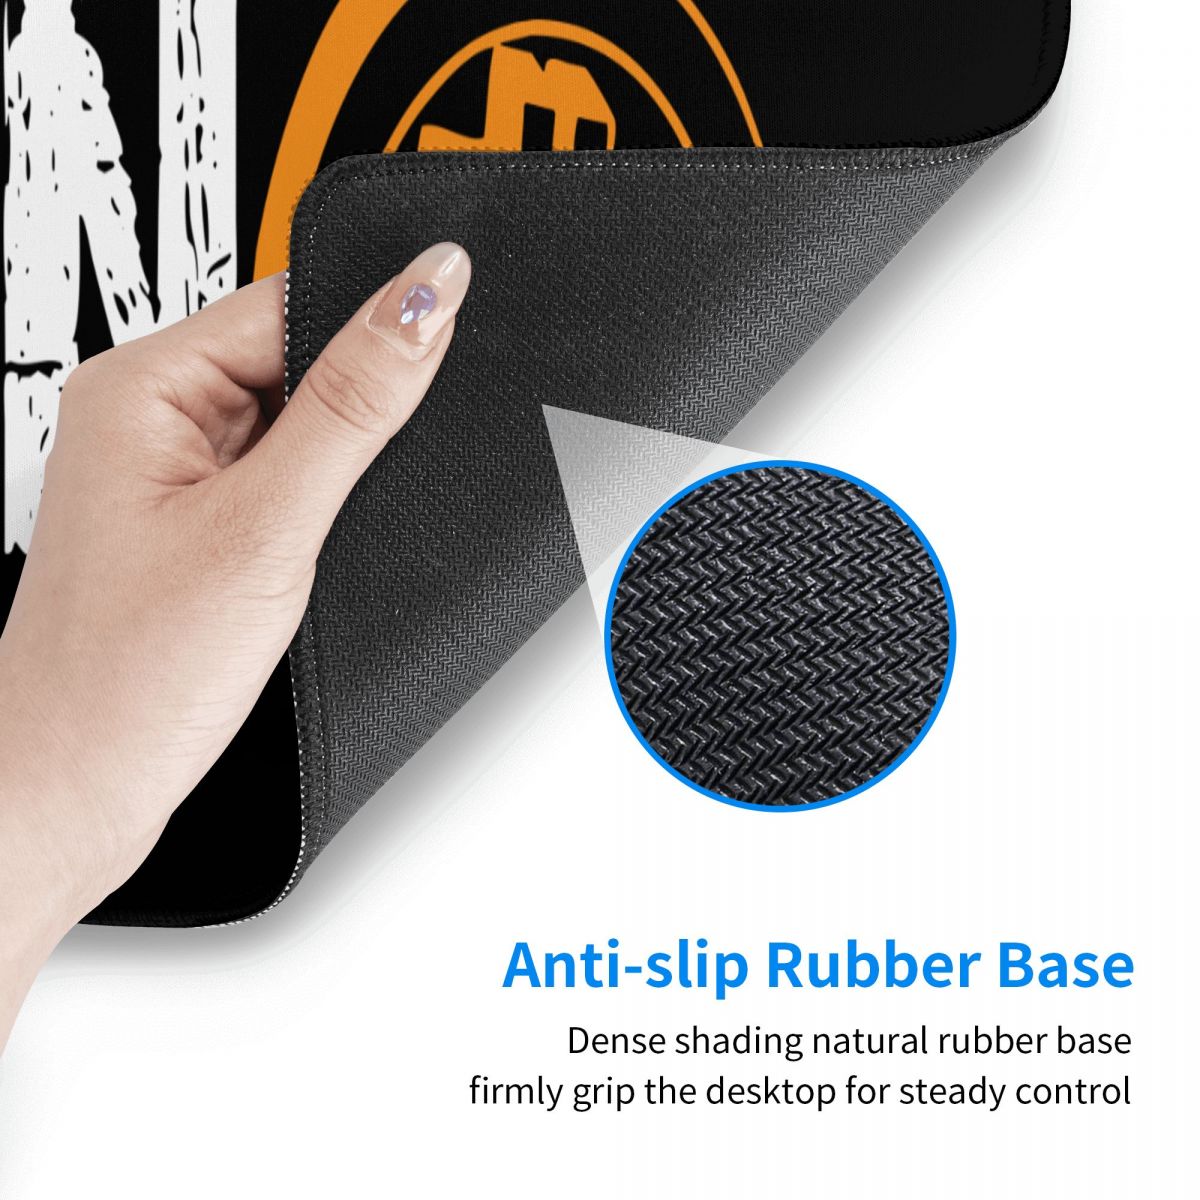 It's Time For Plan B Bitcoin  Long  Mouse Pad